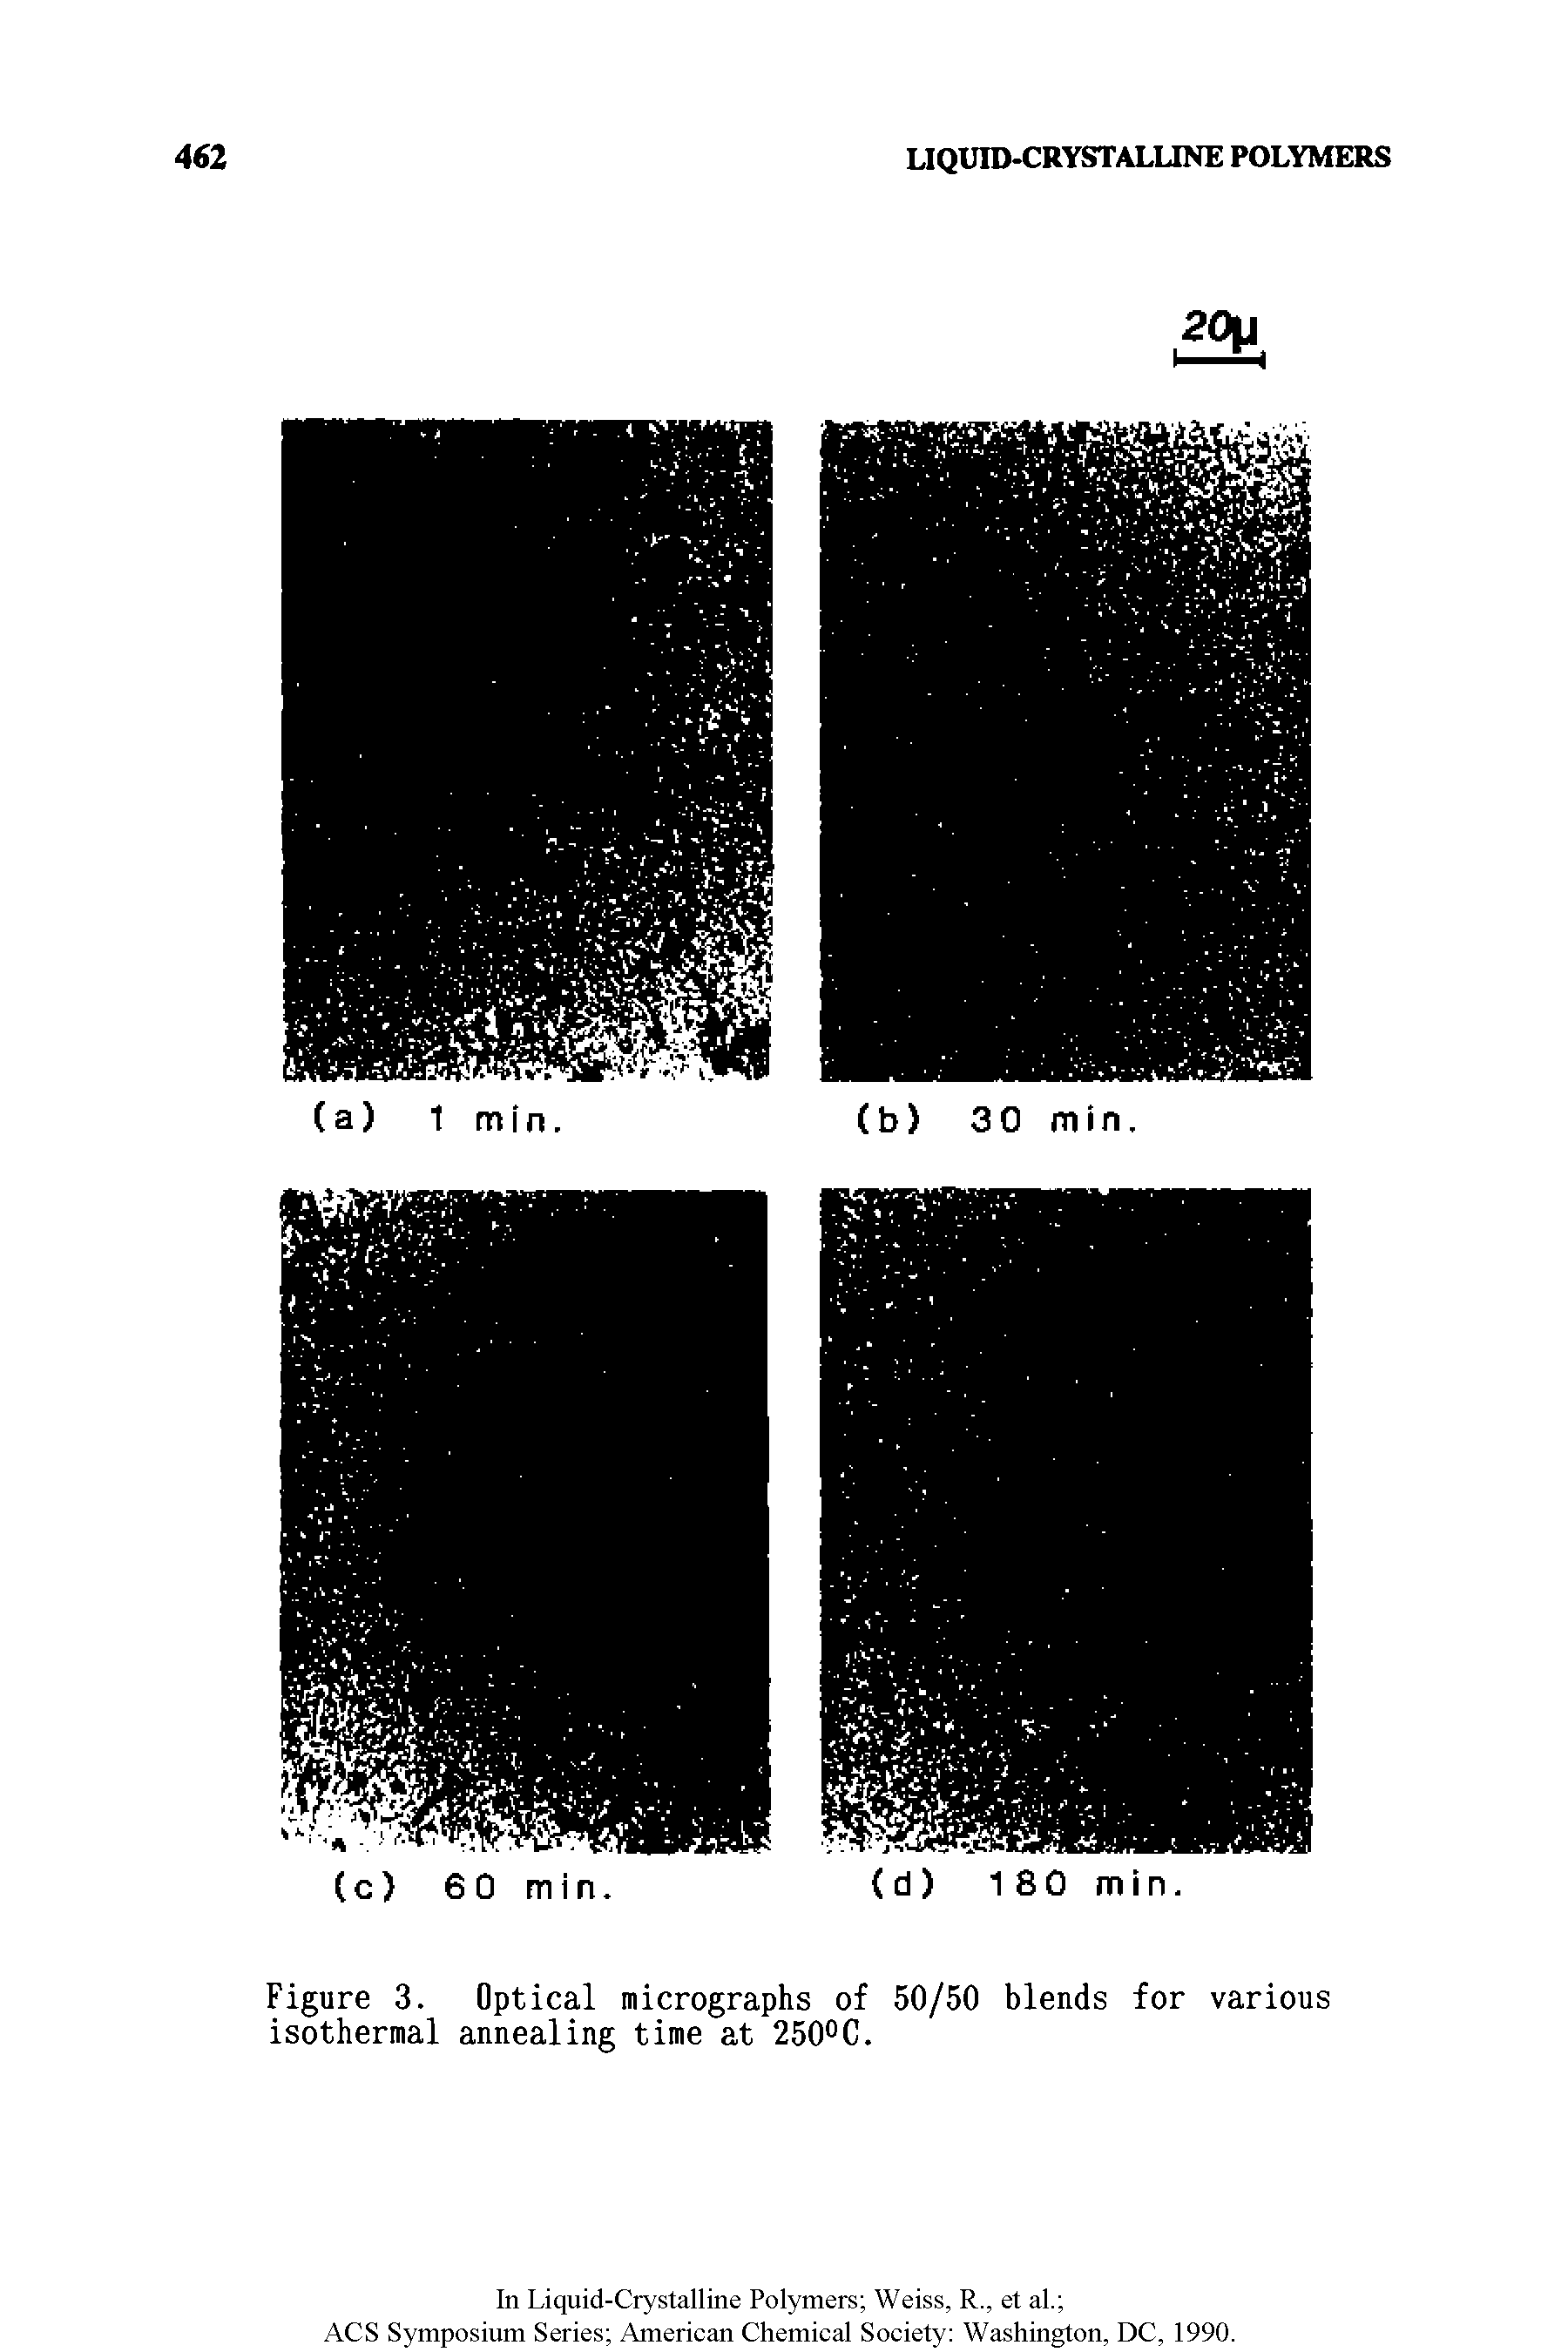 Figure 3. Optical micrographs of 50/50 blends for various isothermal annealing time at 250°C.